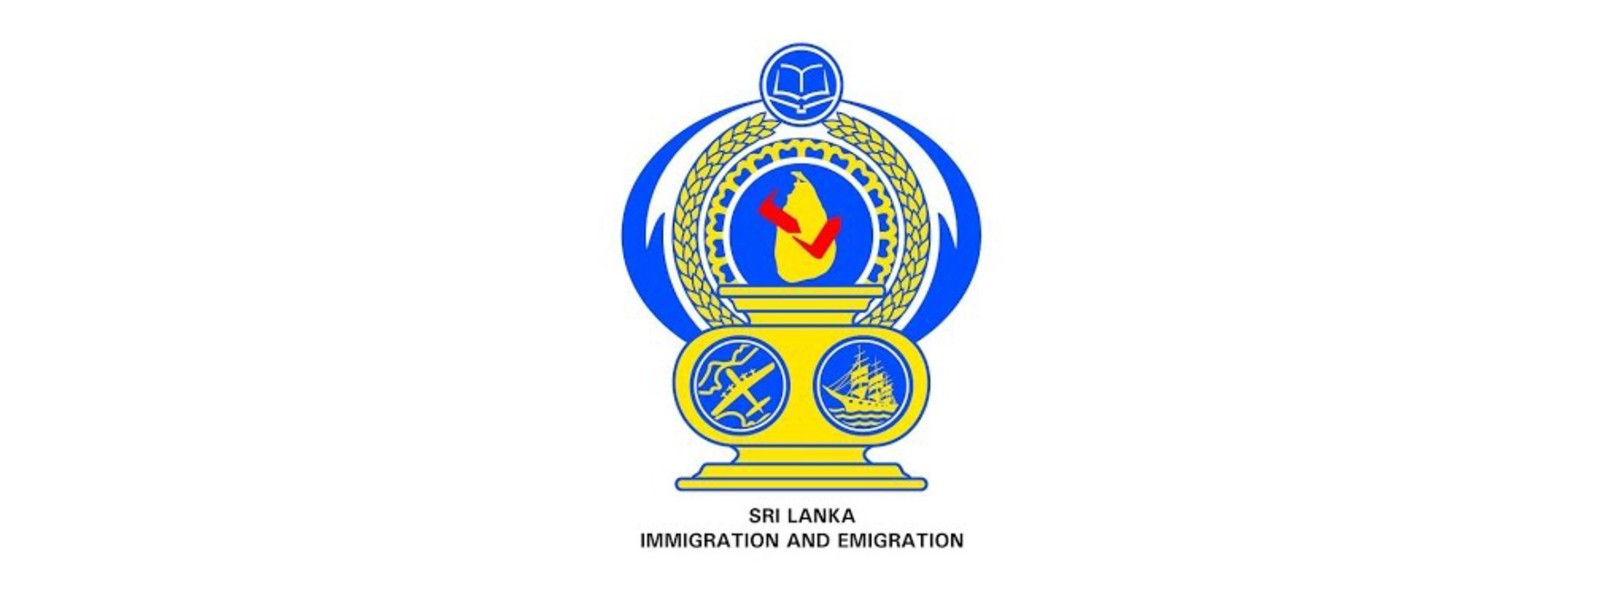 Validity of visas further extended